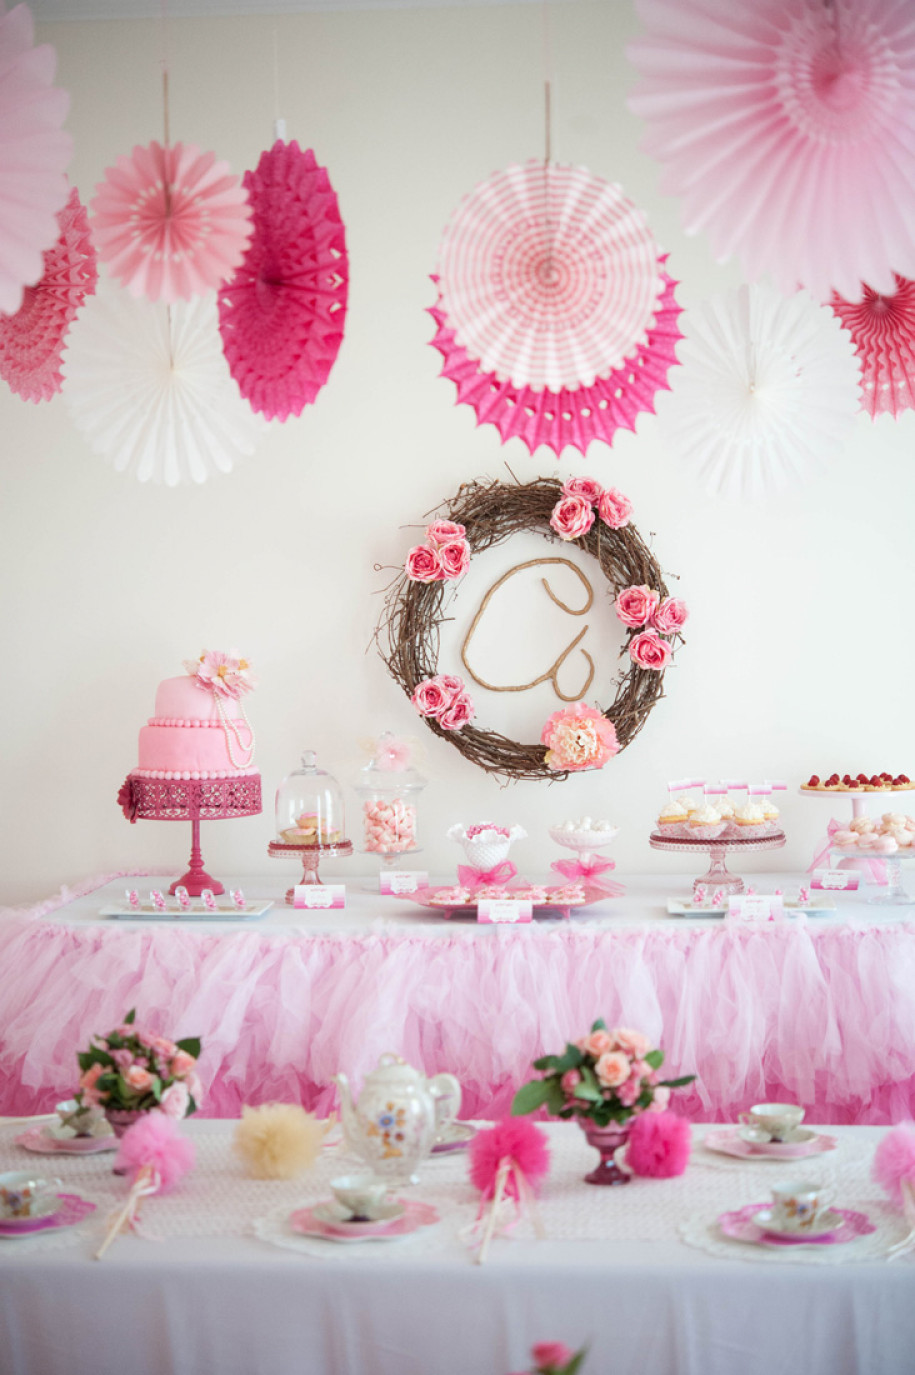 Princess Birthday Decorations
 A Whimsical & Sweet Ombre Princess Party Anders Ruff